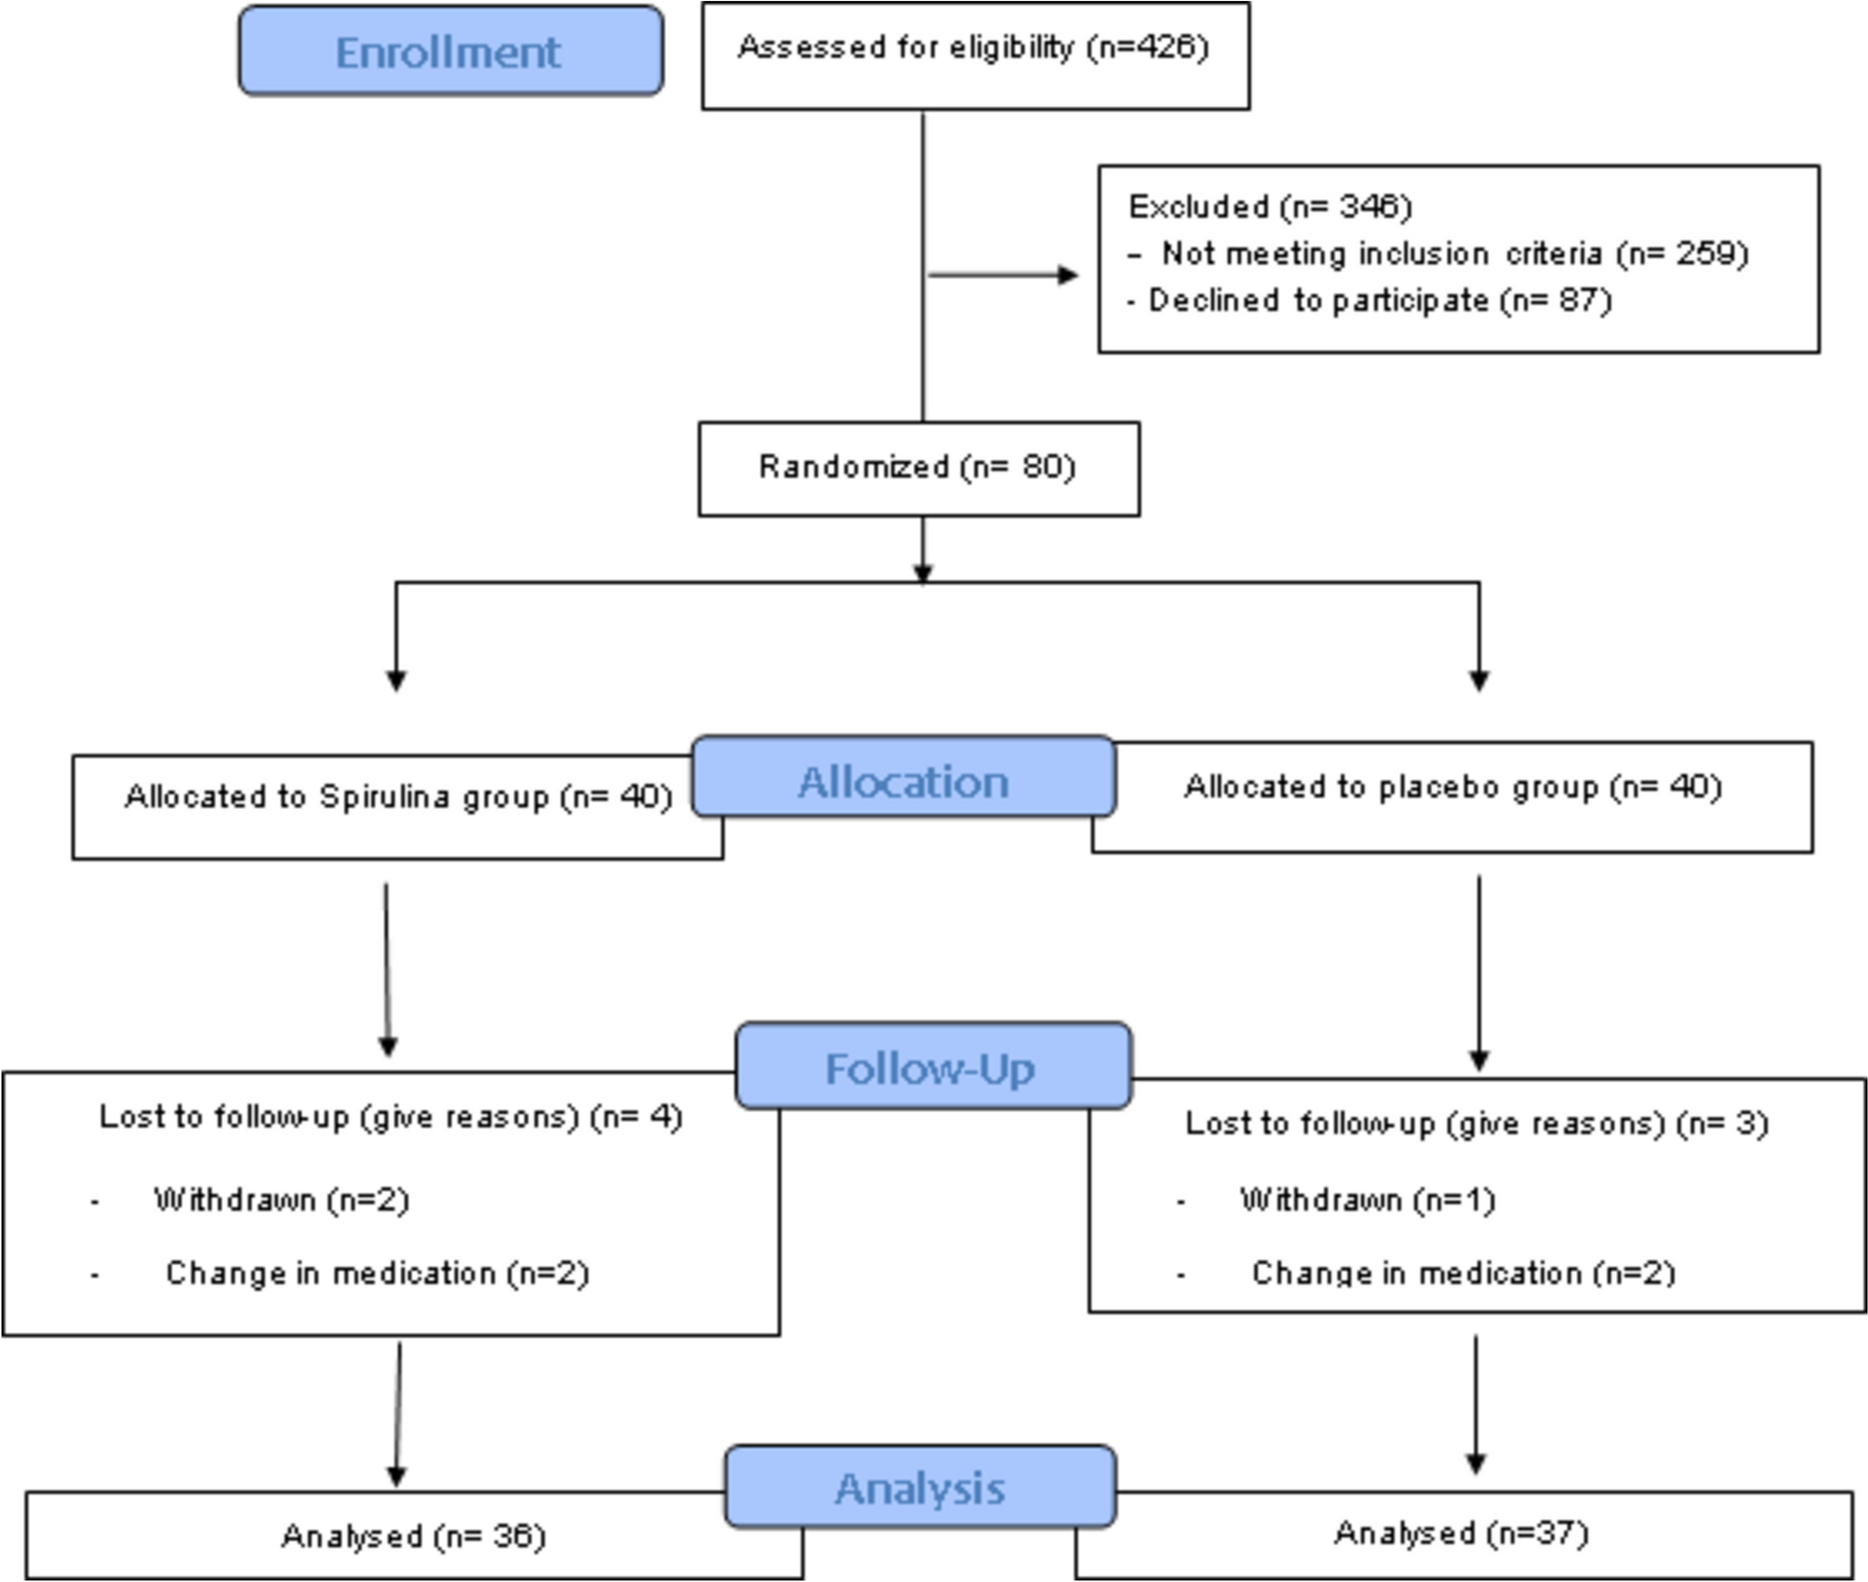 Effects of Spirulina supplementation in patients with ulcerative colitis: a double-blind, placebo-controlled randomized trial